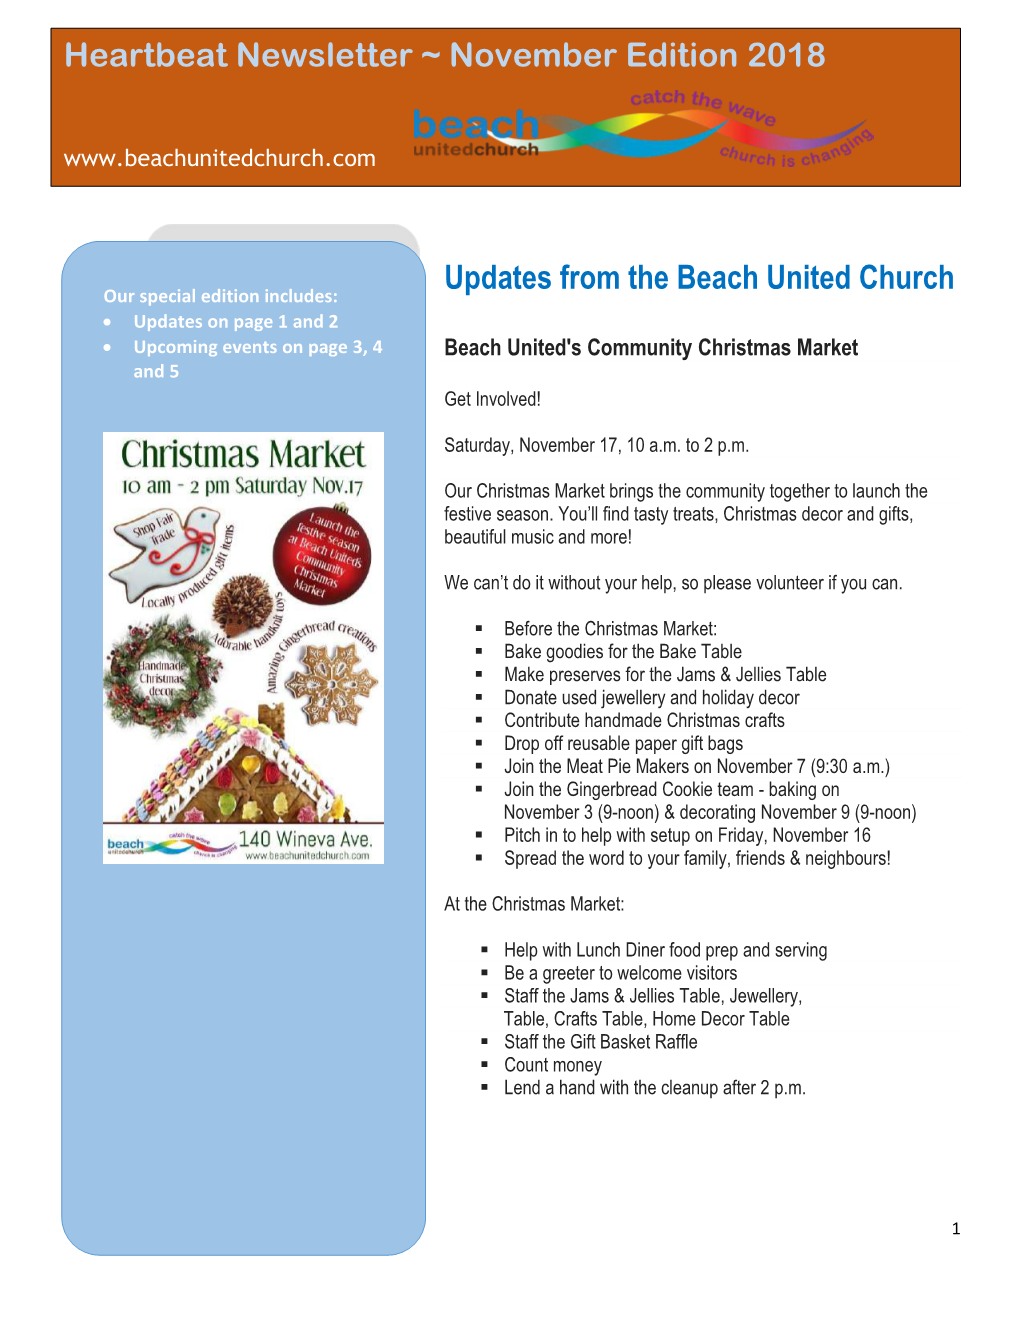 Updates from the Beach United Church Heartbeat Newsletter